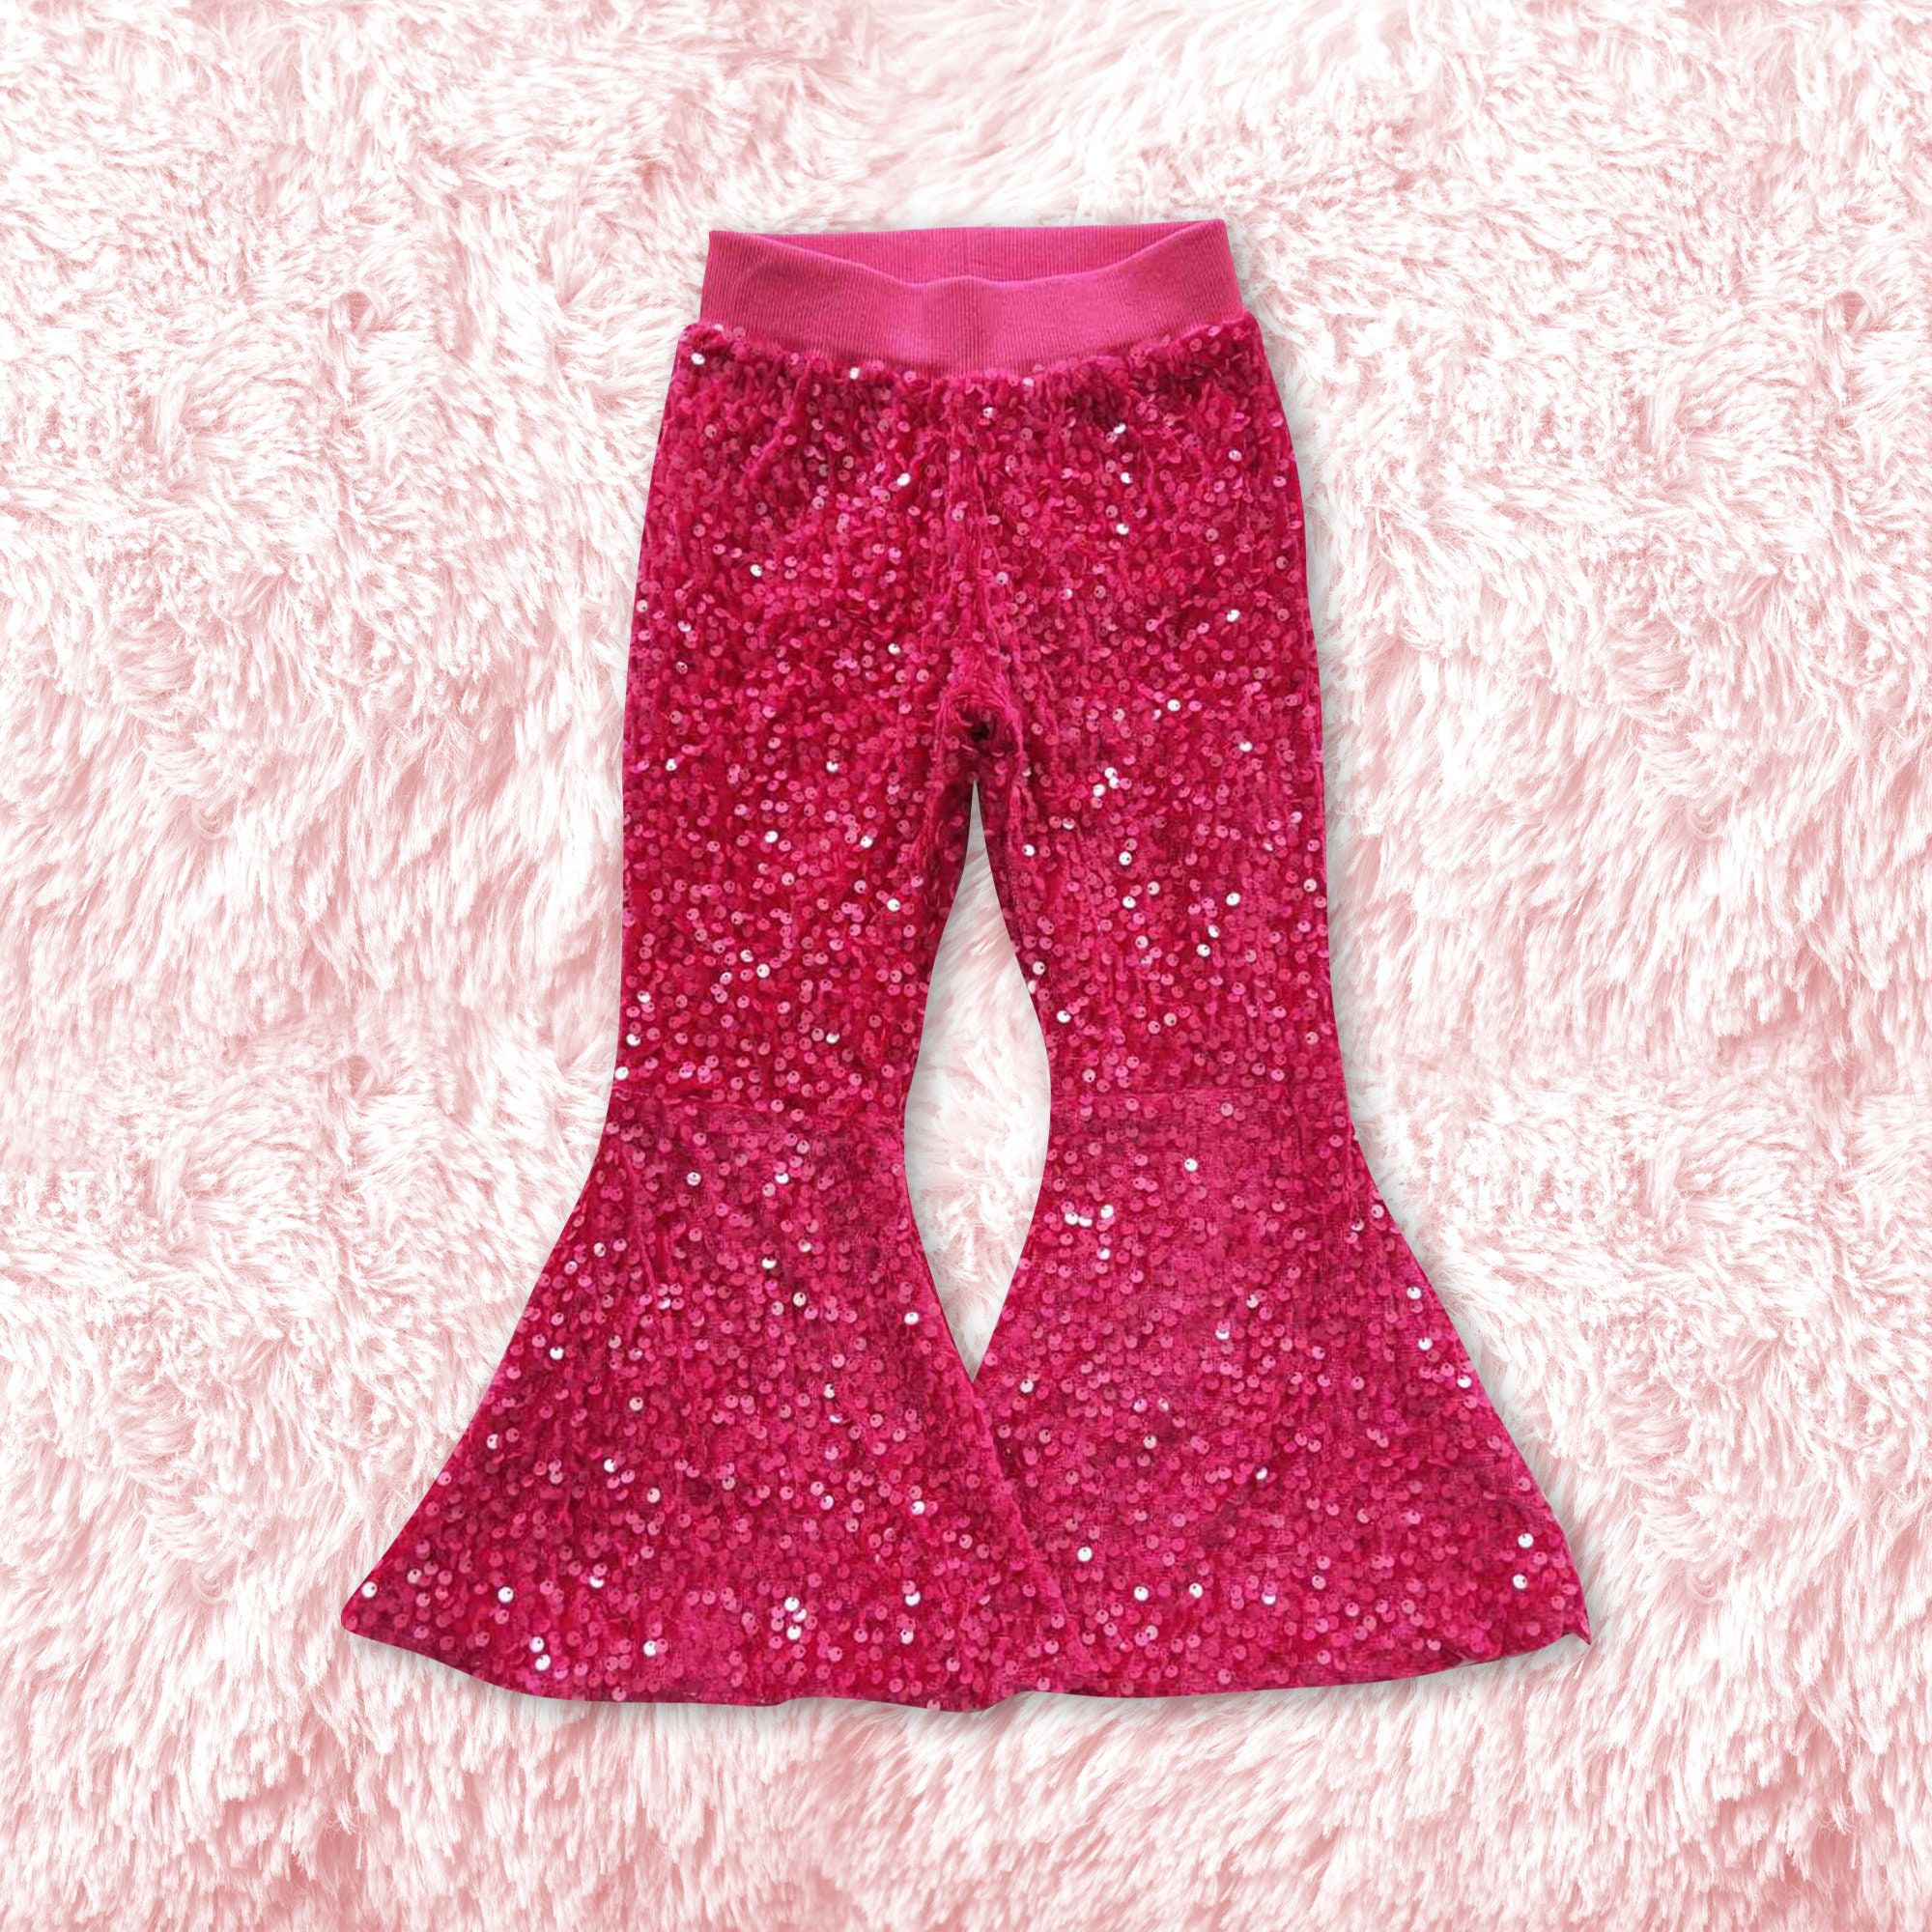 In Barbie's Bubble Sequin Flare Pants